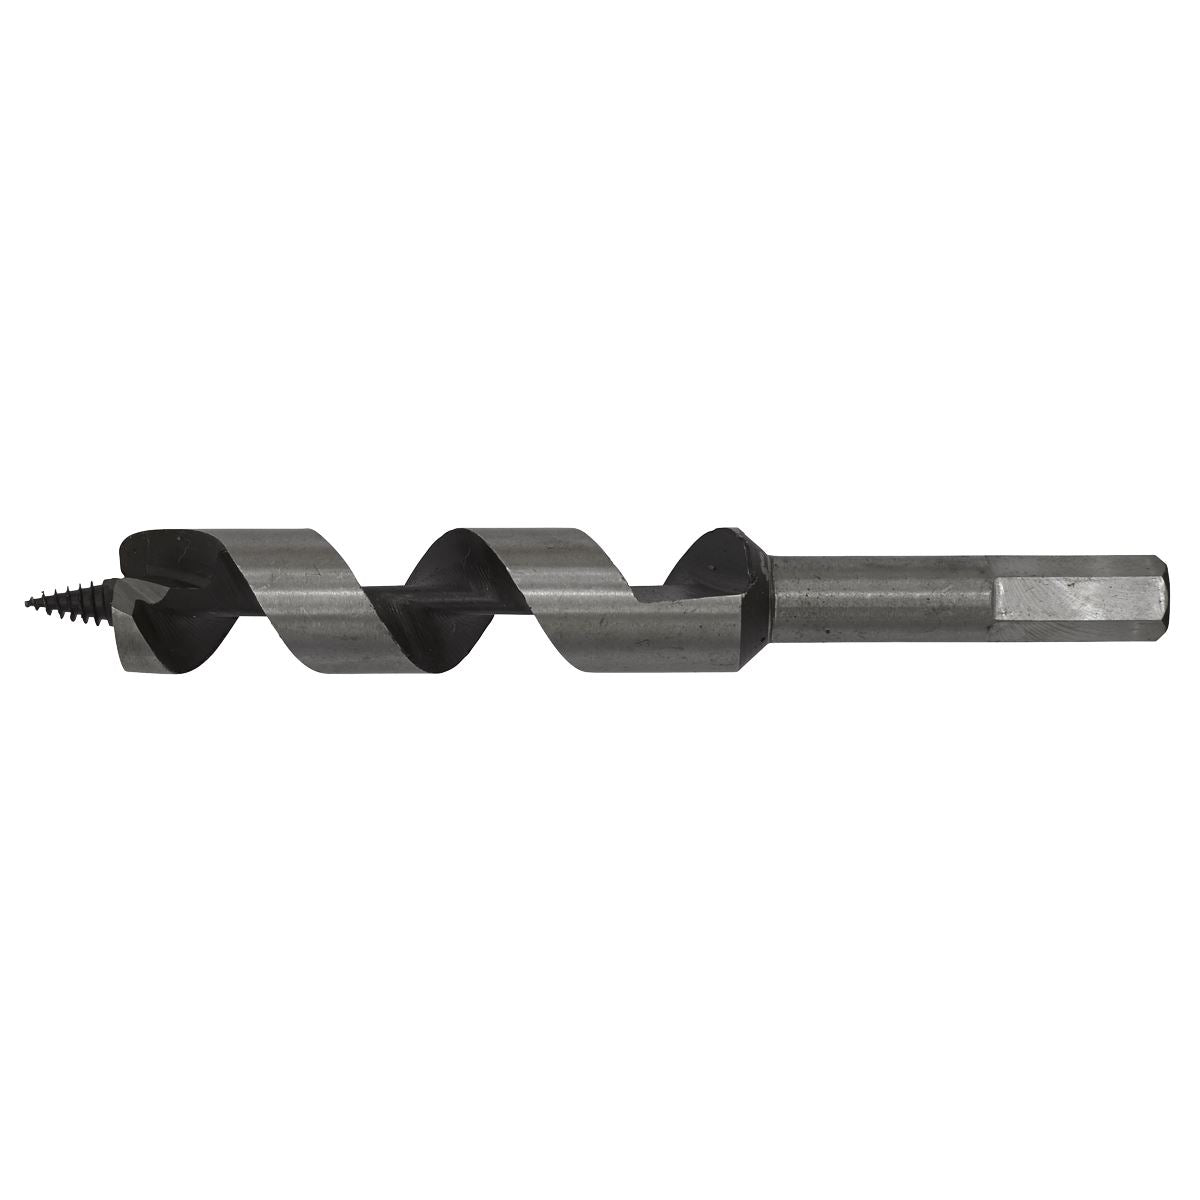 Worksafe by Sealey Auger Wood Drill Bit 18mm x 155mm